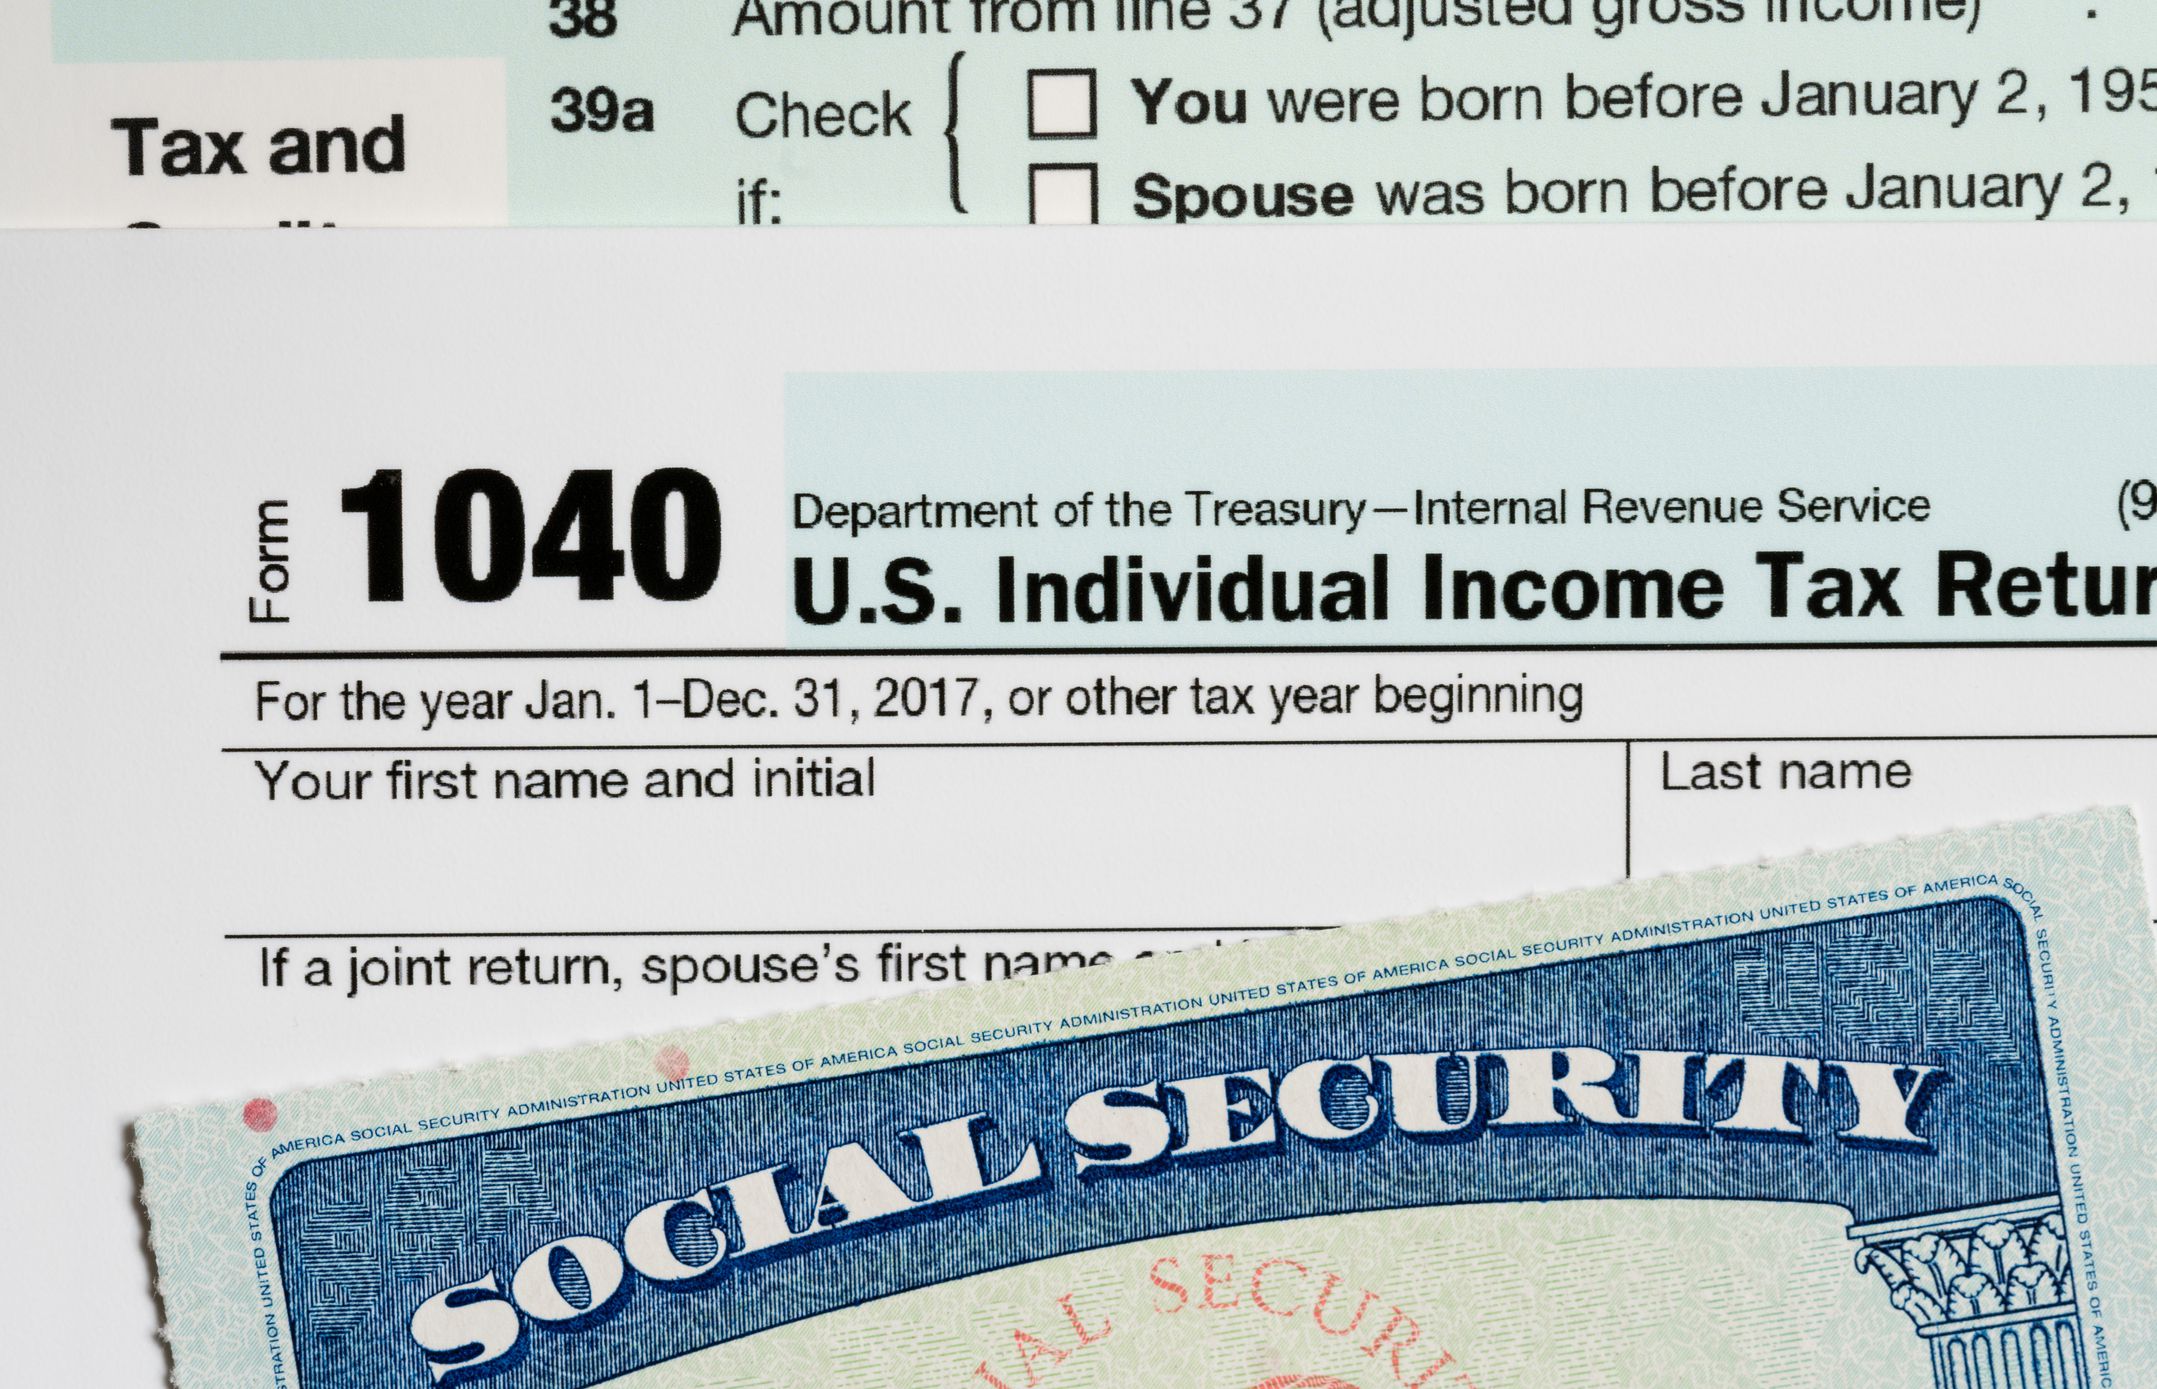 Are Social Security Benefits Taxable After Age 62?